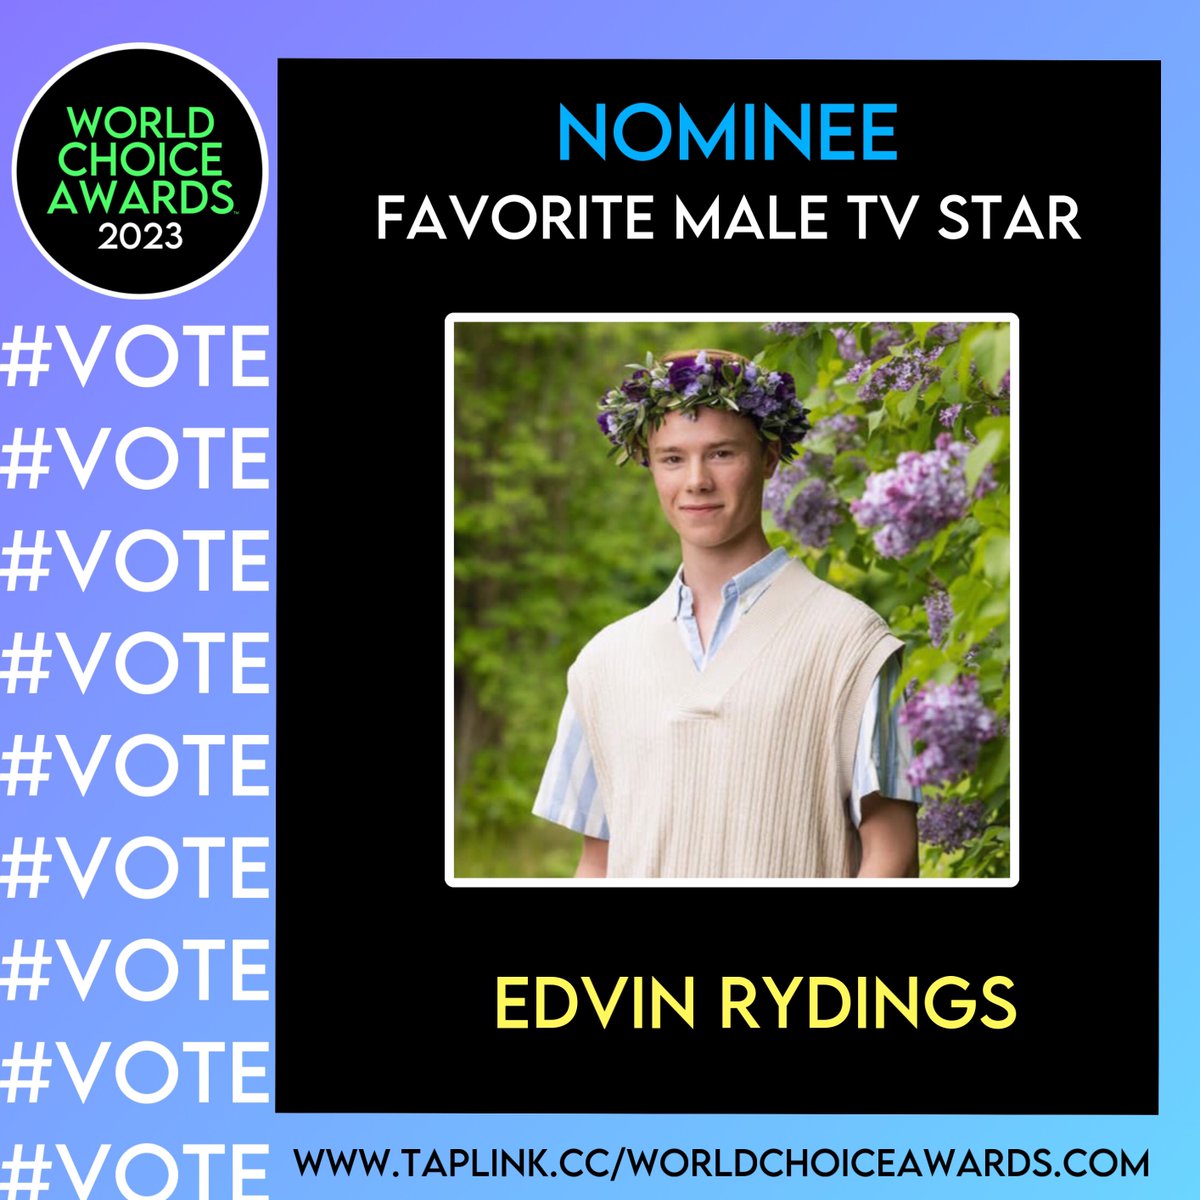 #WorldChoiceAwards 2023 #nominee 

Favorite Male Actor

Edvin Rydings 

Tap the link in our Bio to Vote Now!!!

#vote #favorite #maleactor #awards #edvinryding